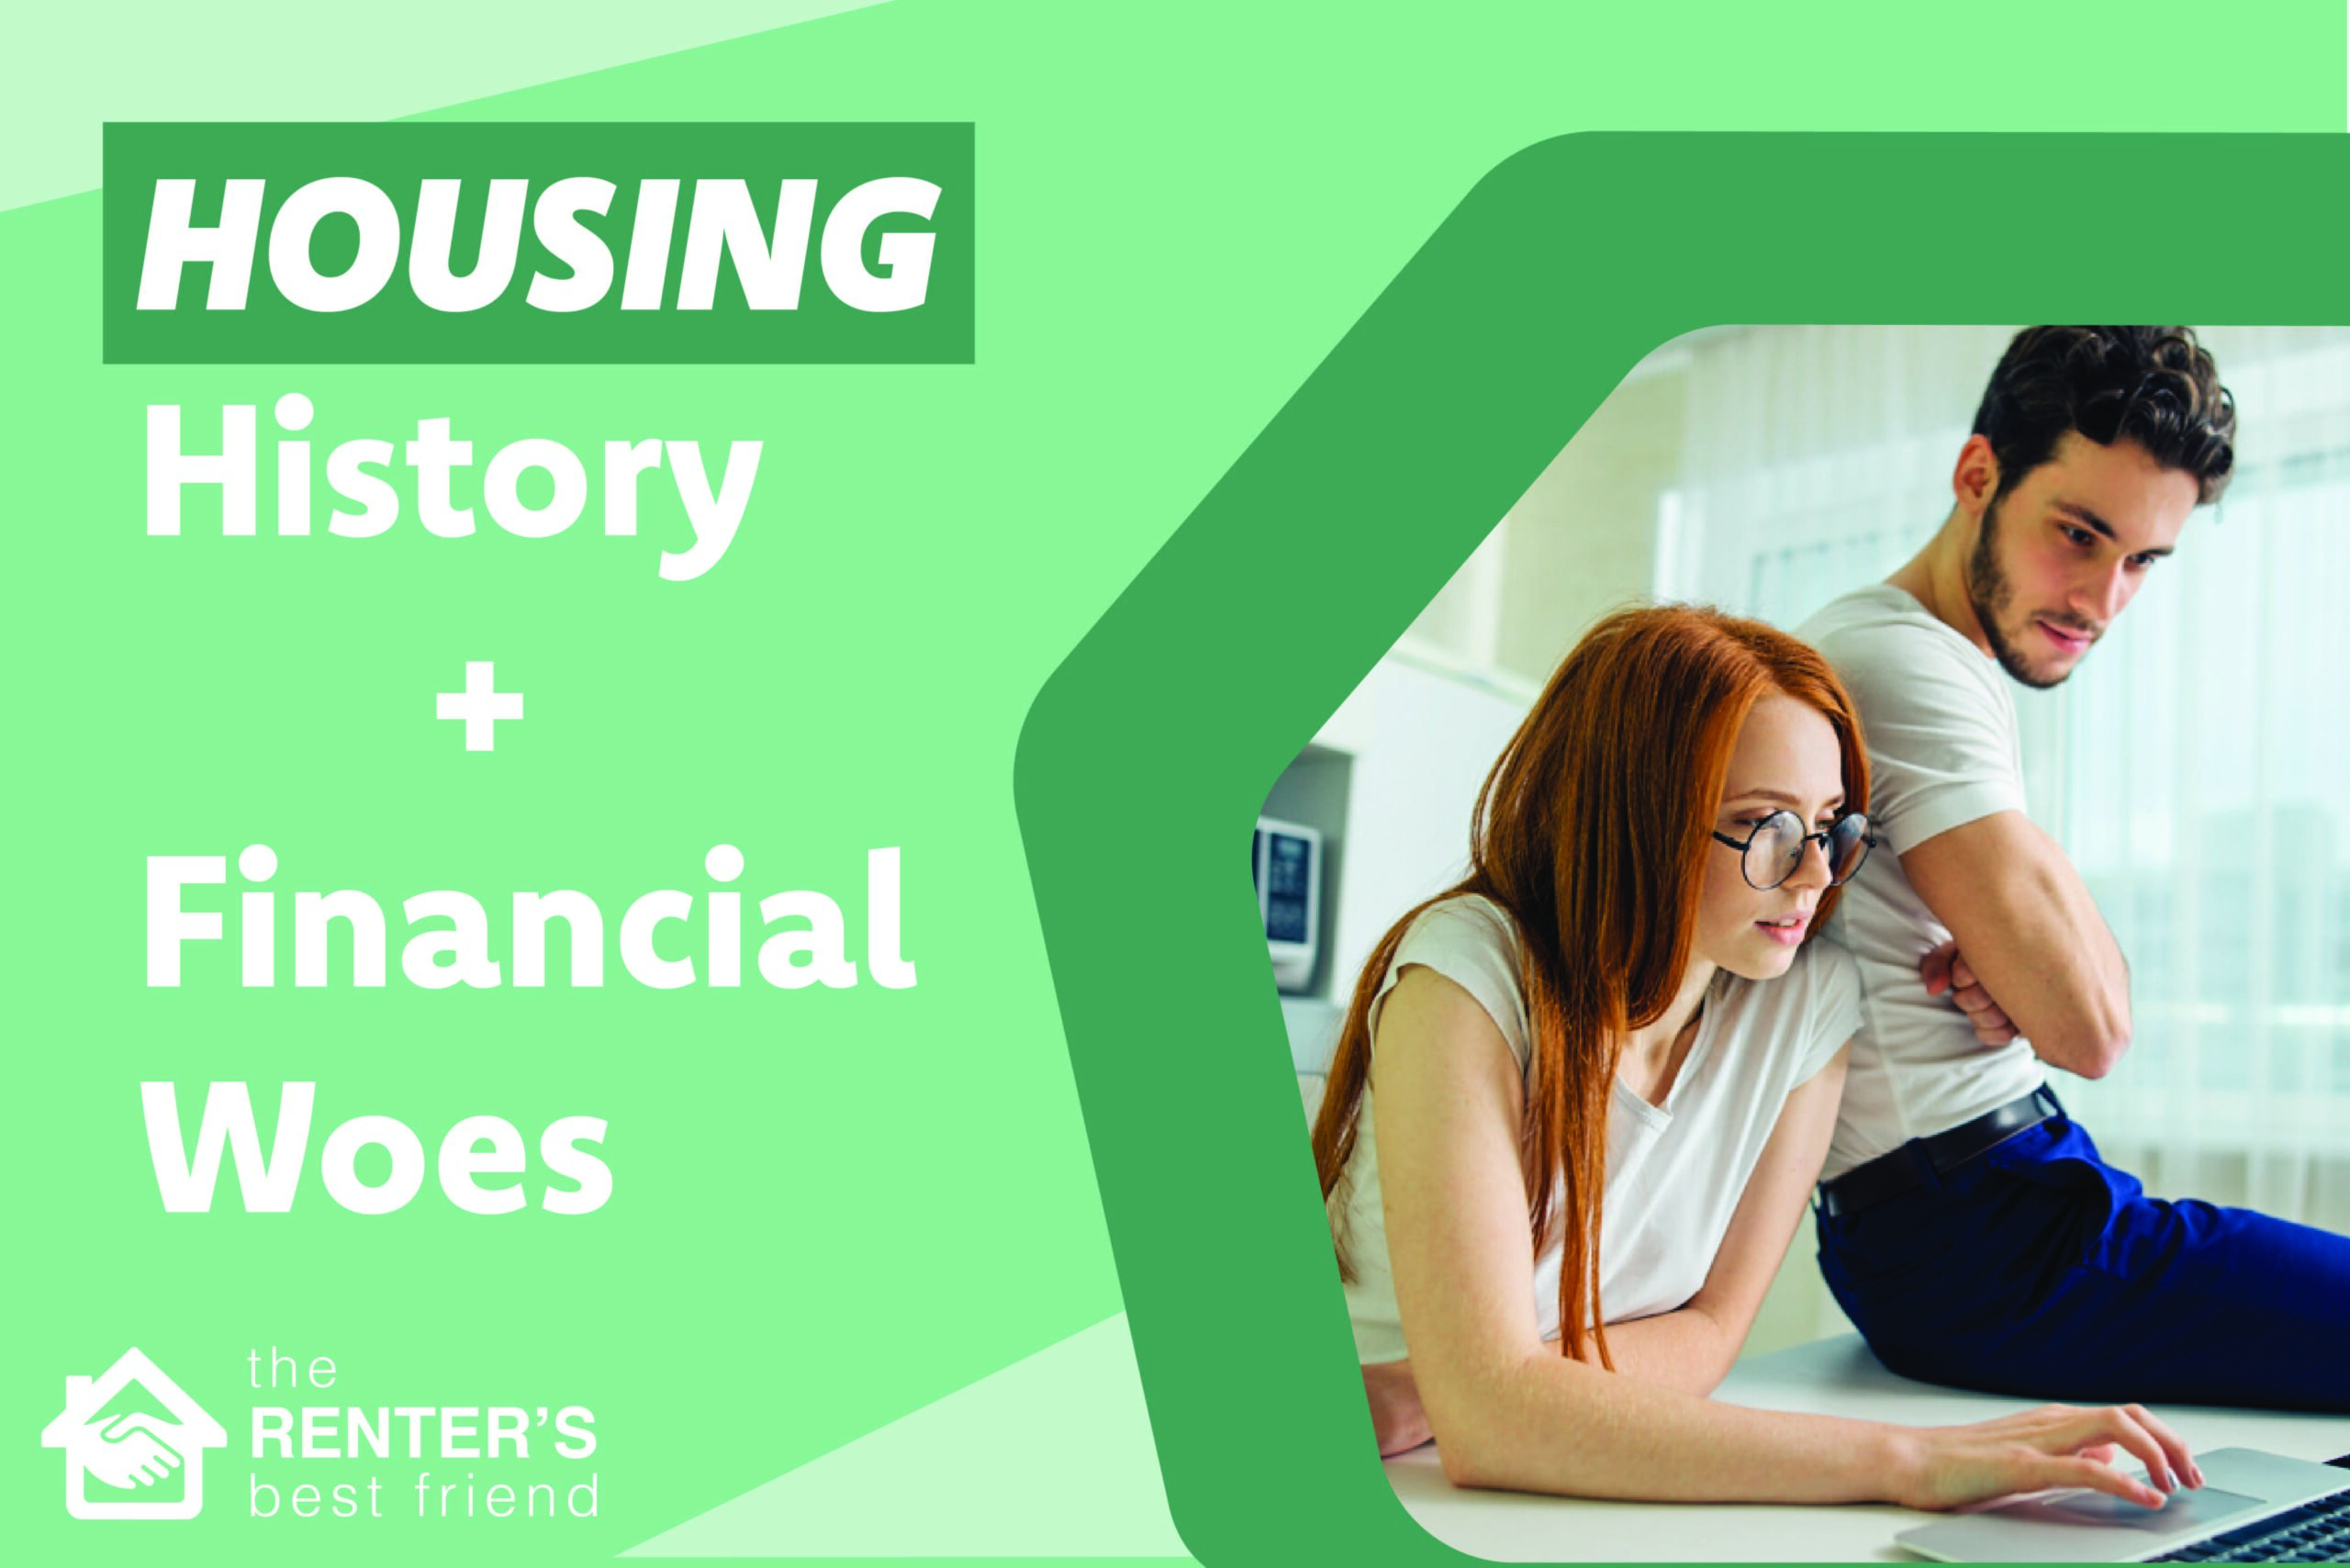 Housing history and financial woes affecting buying a house?